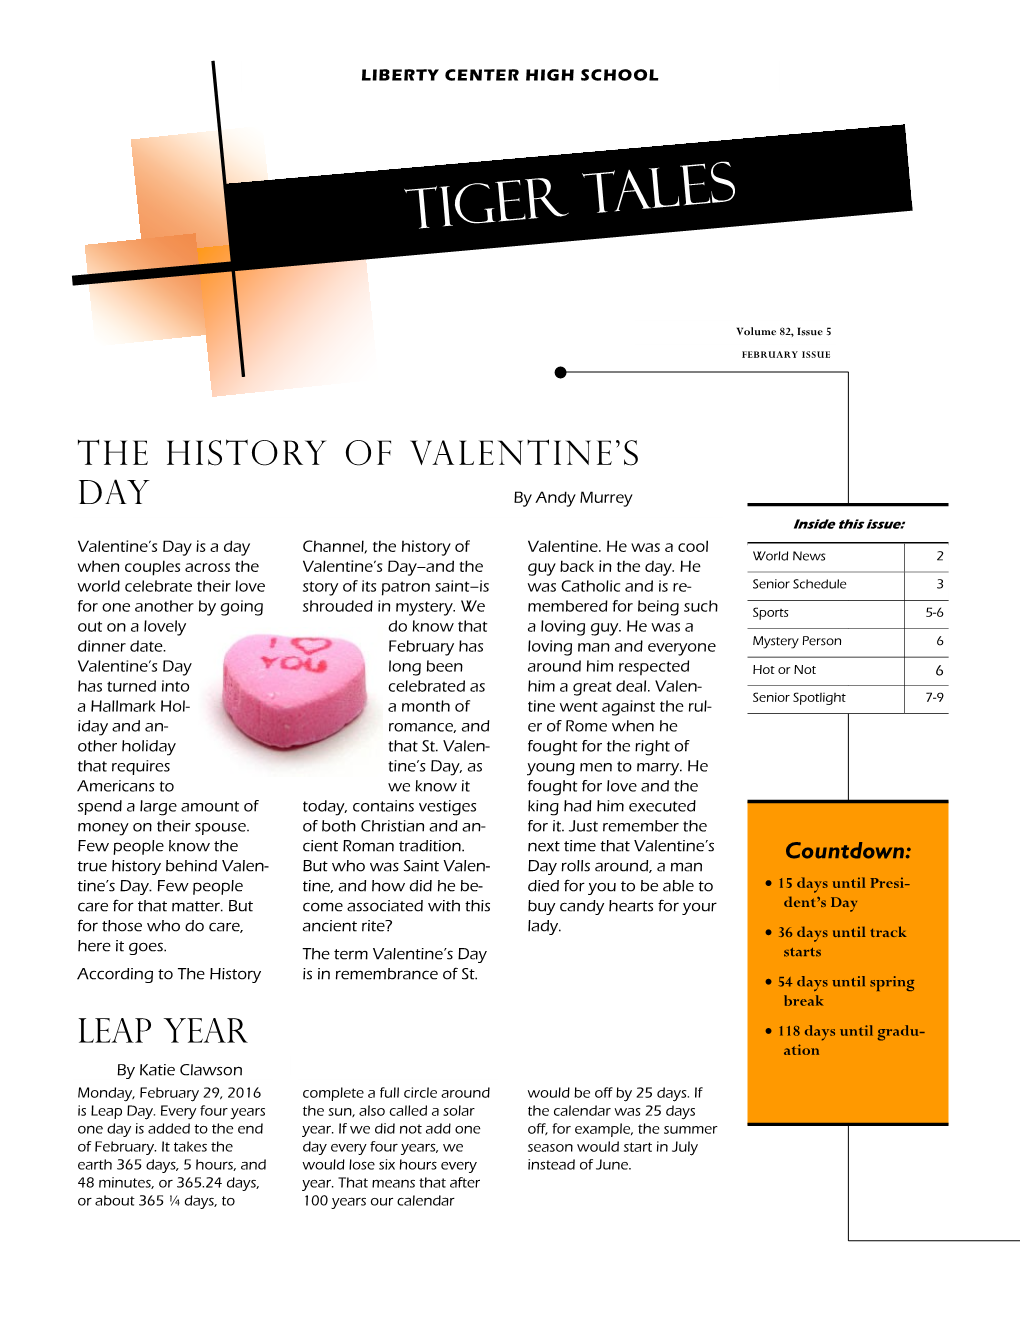 The History of Valentine's Day Leap Year